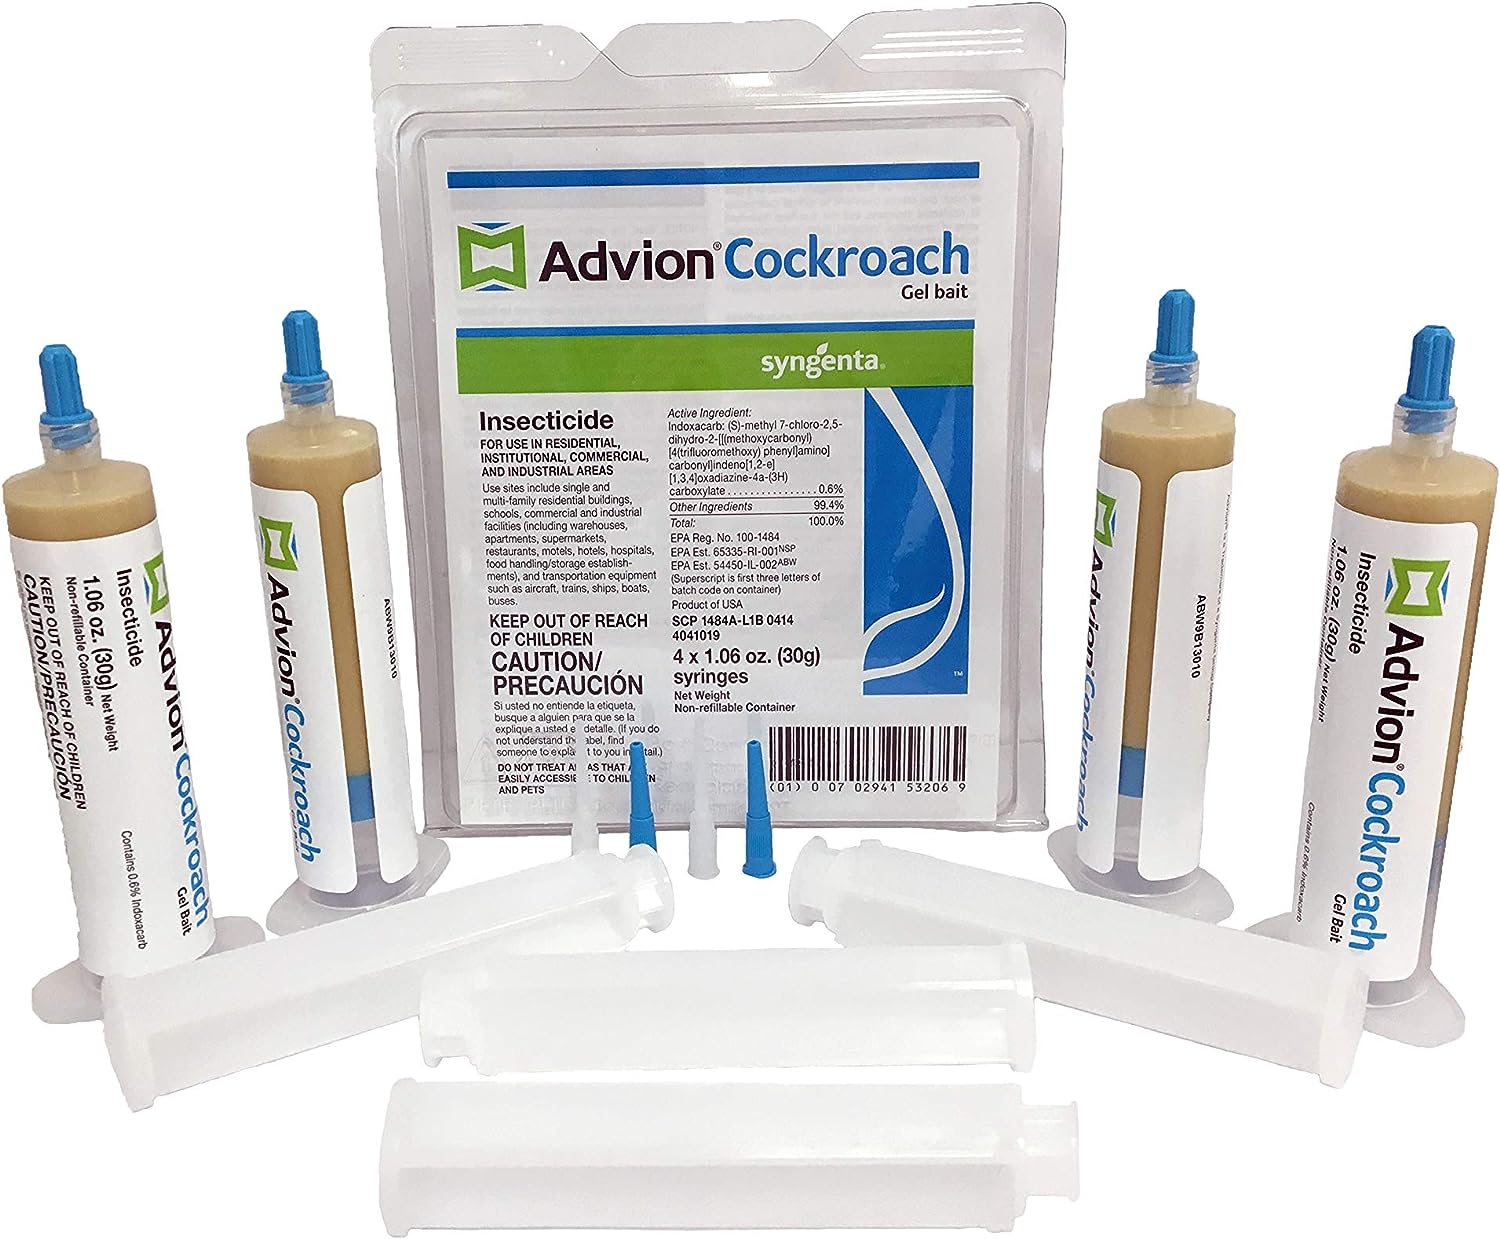 advion 383920 4 Tubes and 4 Plungers Cockroach German [...]